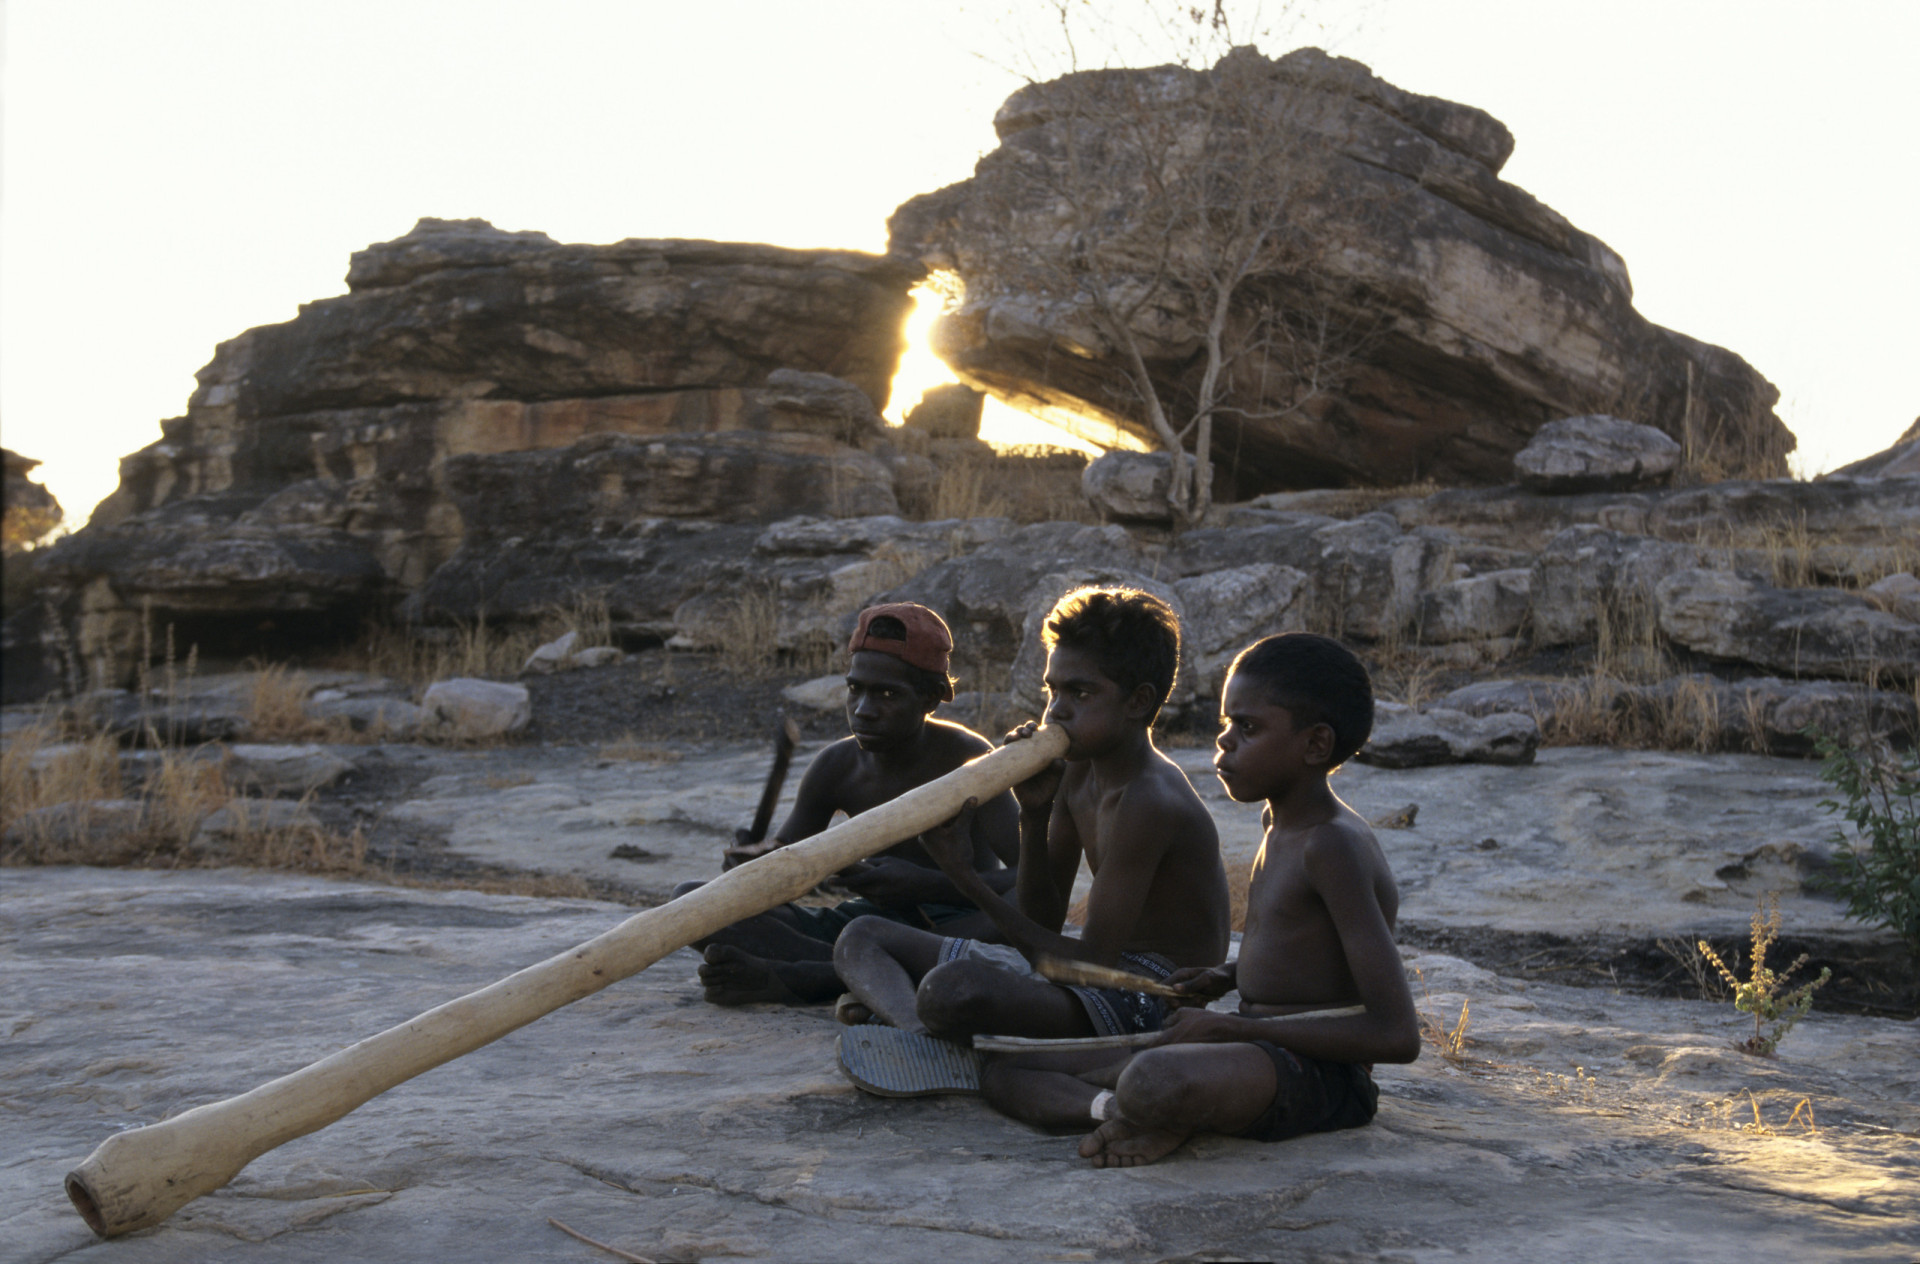 <p>Traditional Aboriginal music often features the didgeridoo, a wind instrument believed to be one of the oldest musical instruments in the world.</p><p><a href="https://www.msn.com/en-us/community/channel/vid-7xx8mnucu55yw63we9va2gwr7uihbxwc68fxqp25x6tg4ftibpra?cvid=94631541bc0f4f89bfd59158d696ad7e">Follow us and access great exclusive content every day</a></p>